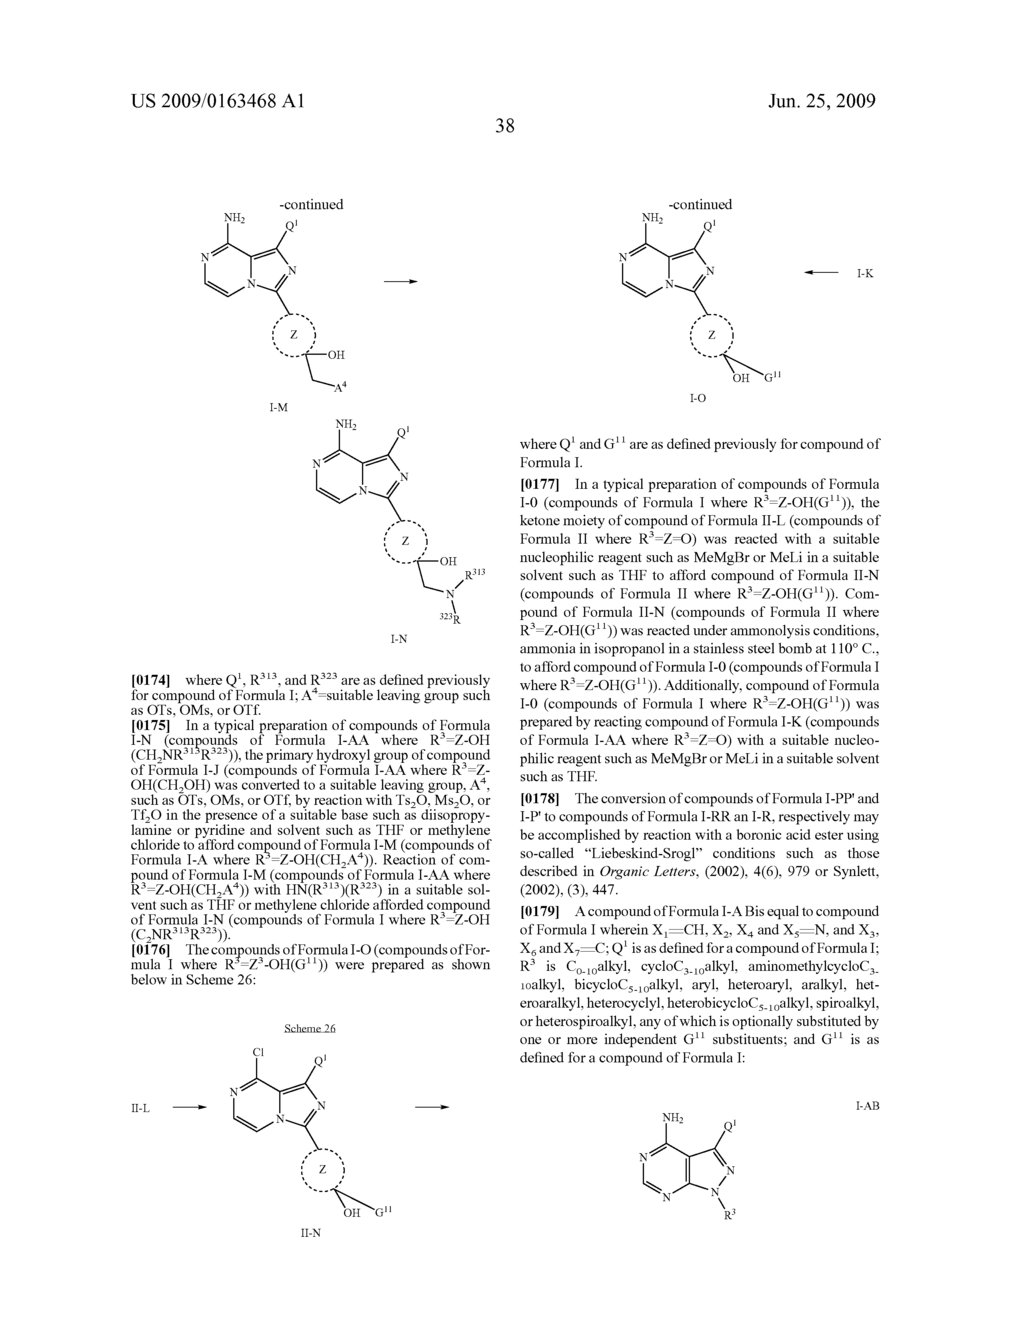 Fused Bicyclic mTor Inhibitors - diagram, schematic, and image 39